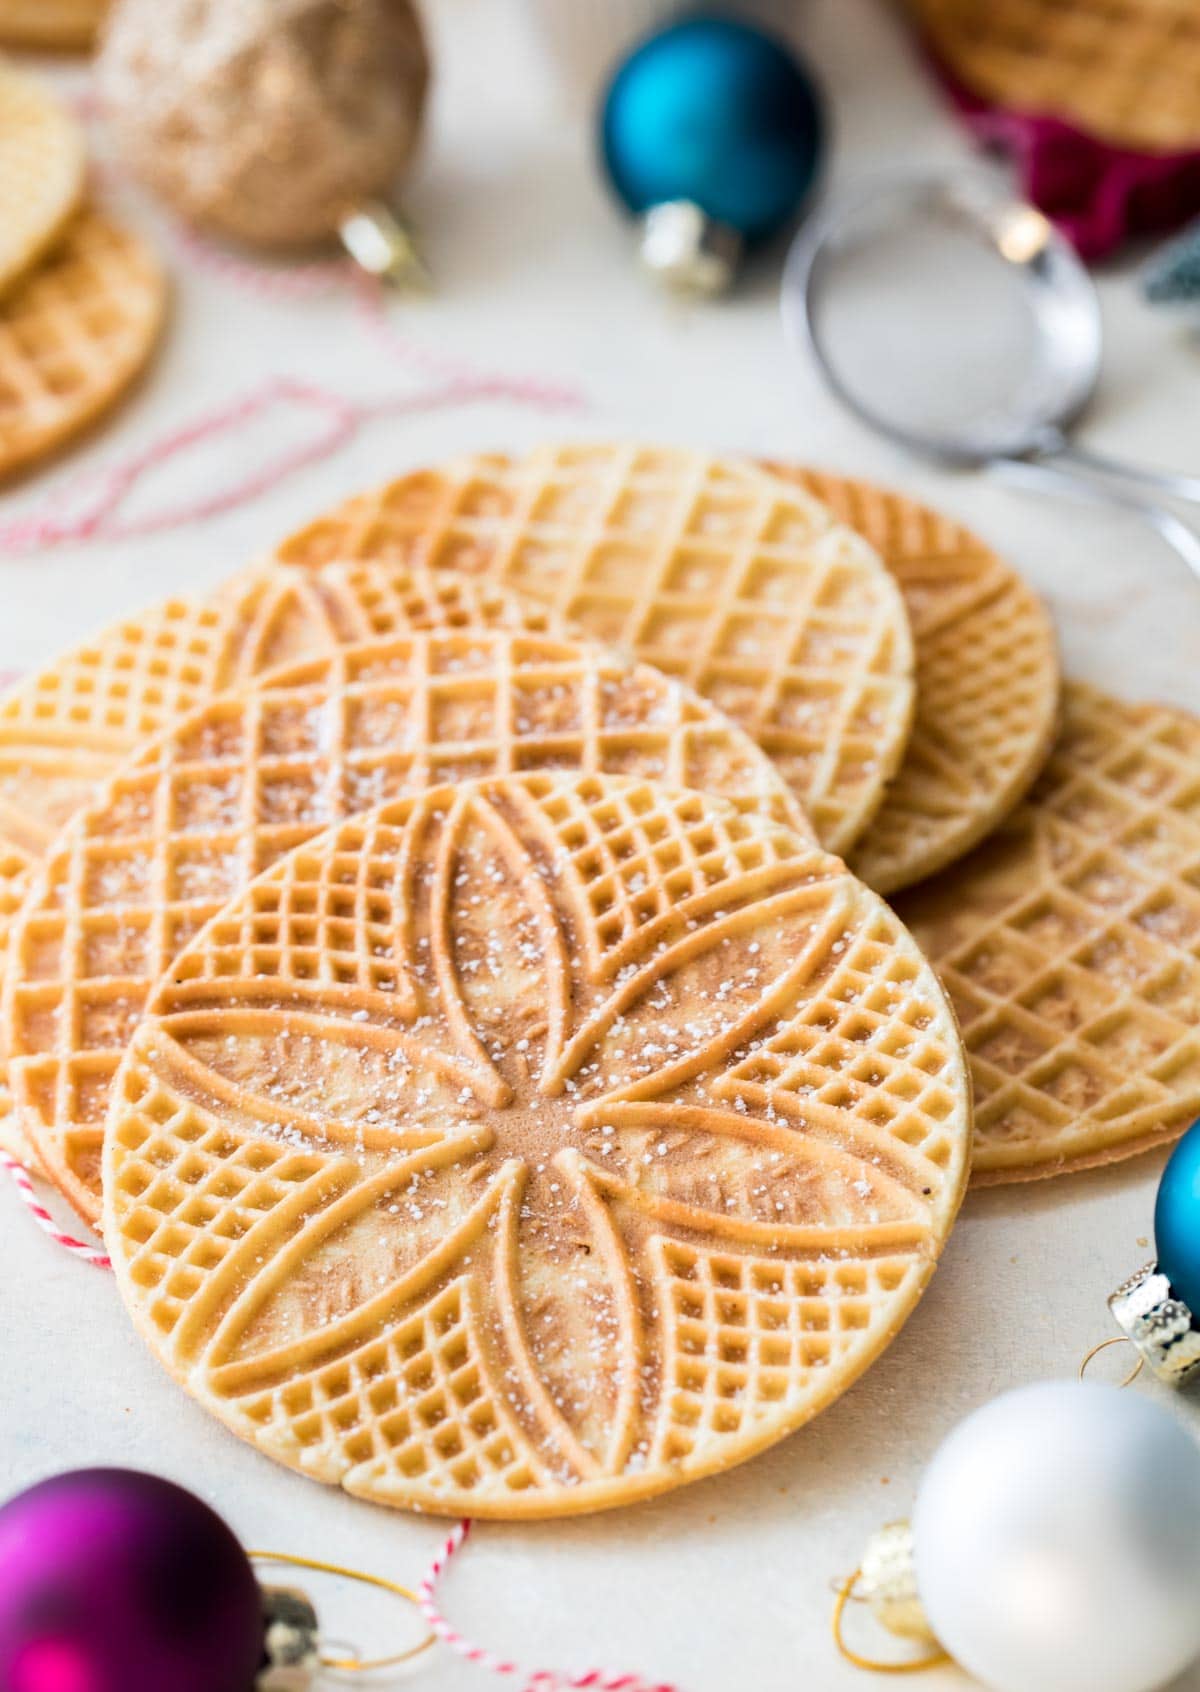 Pizzelle arranged on white board surrounded by ornaments